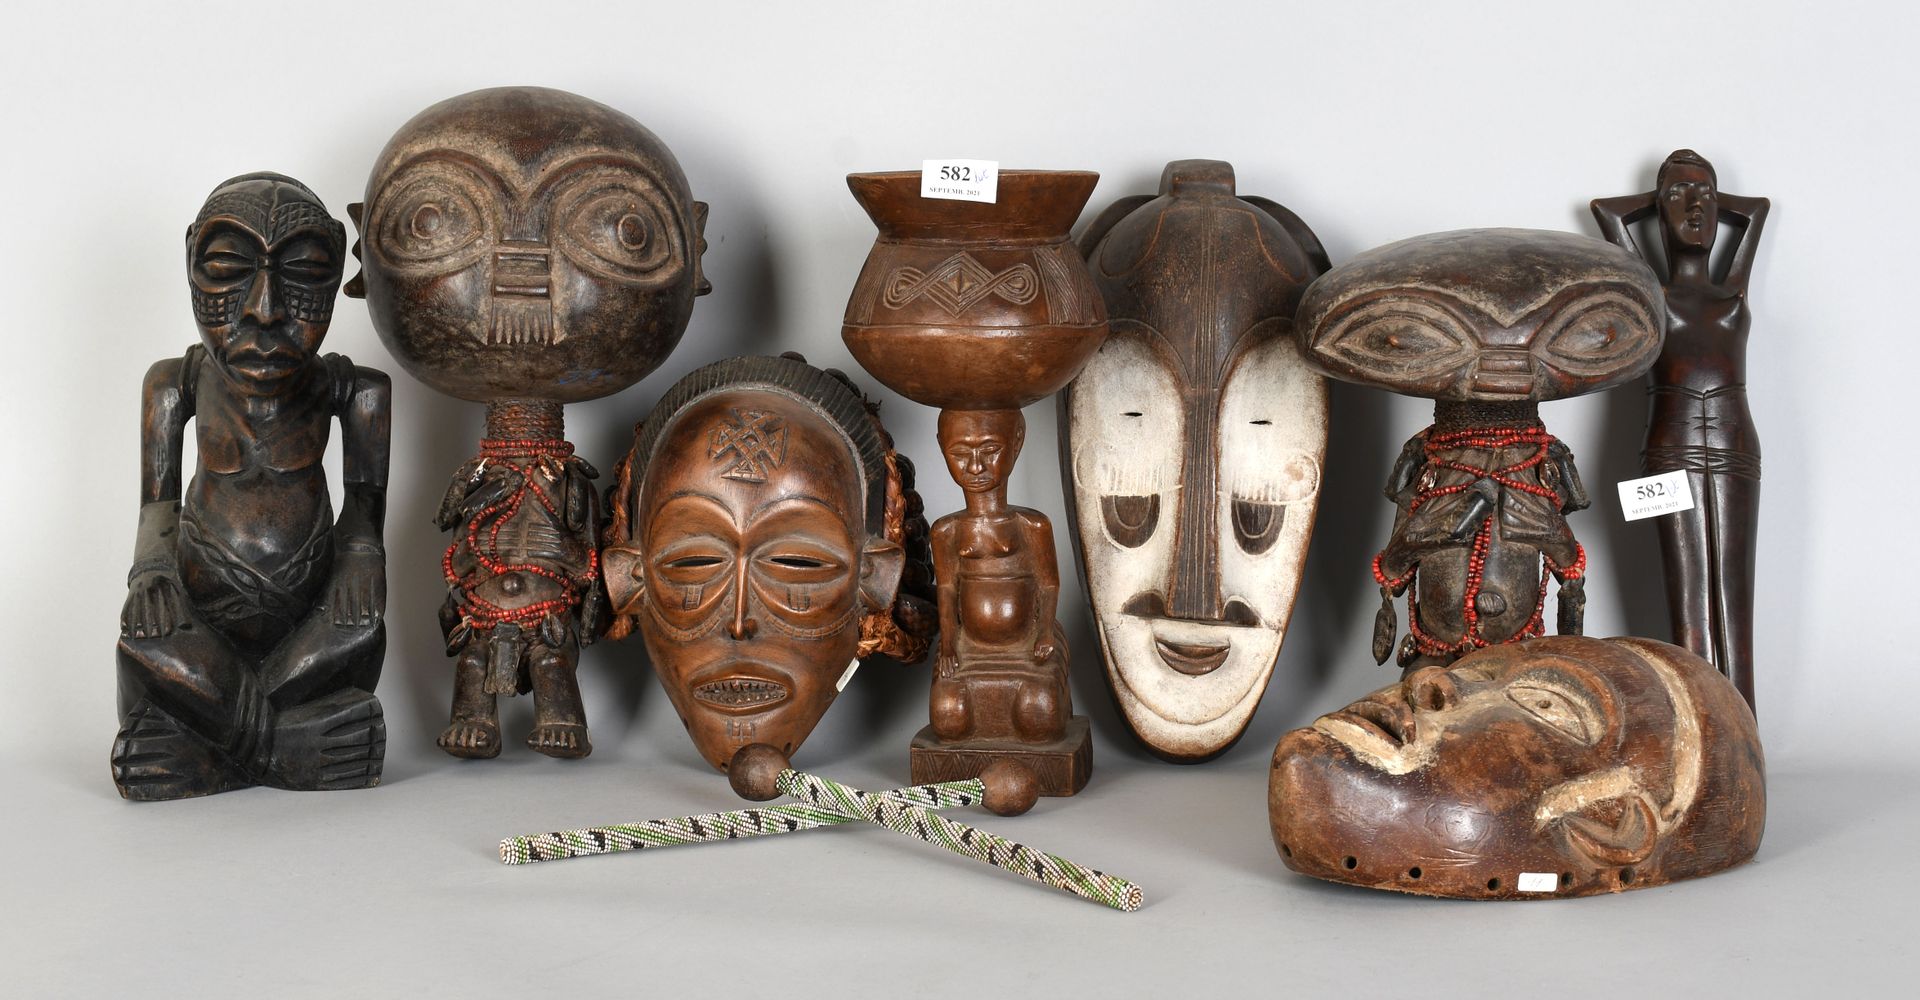 Null Africana

Lot of statues, masks and fetishes